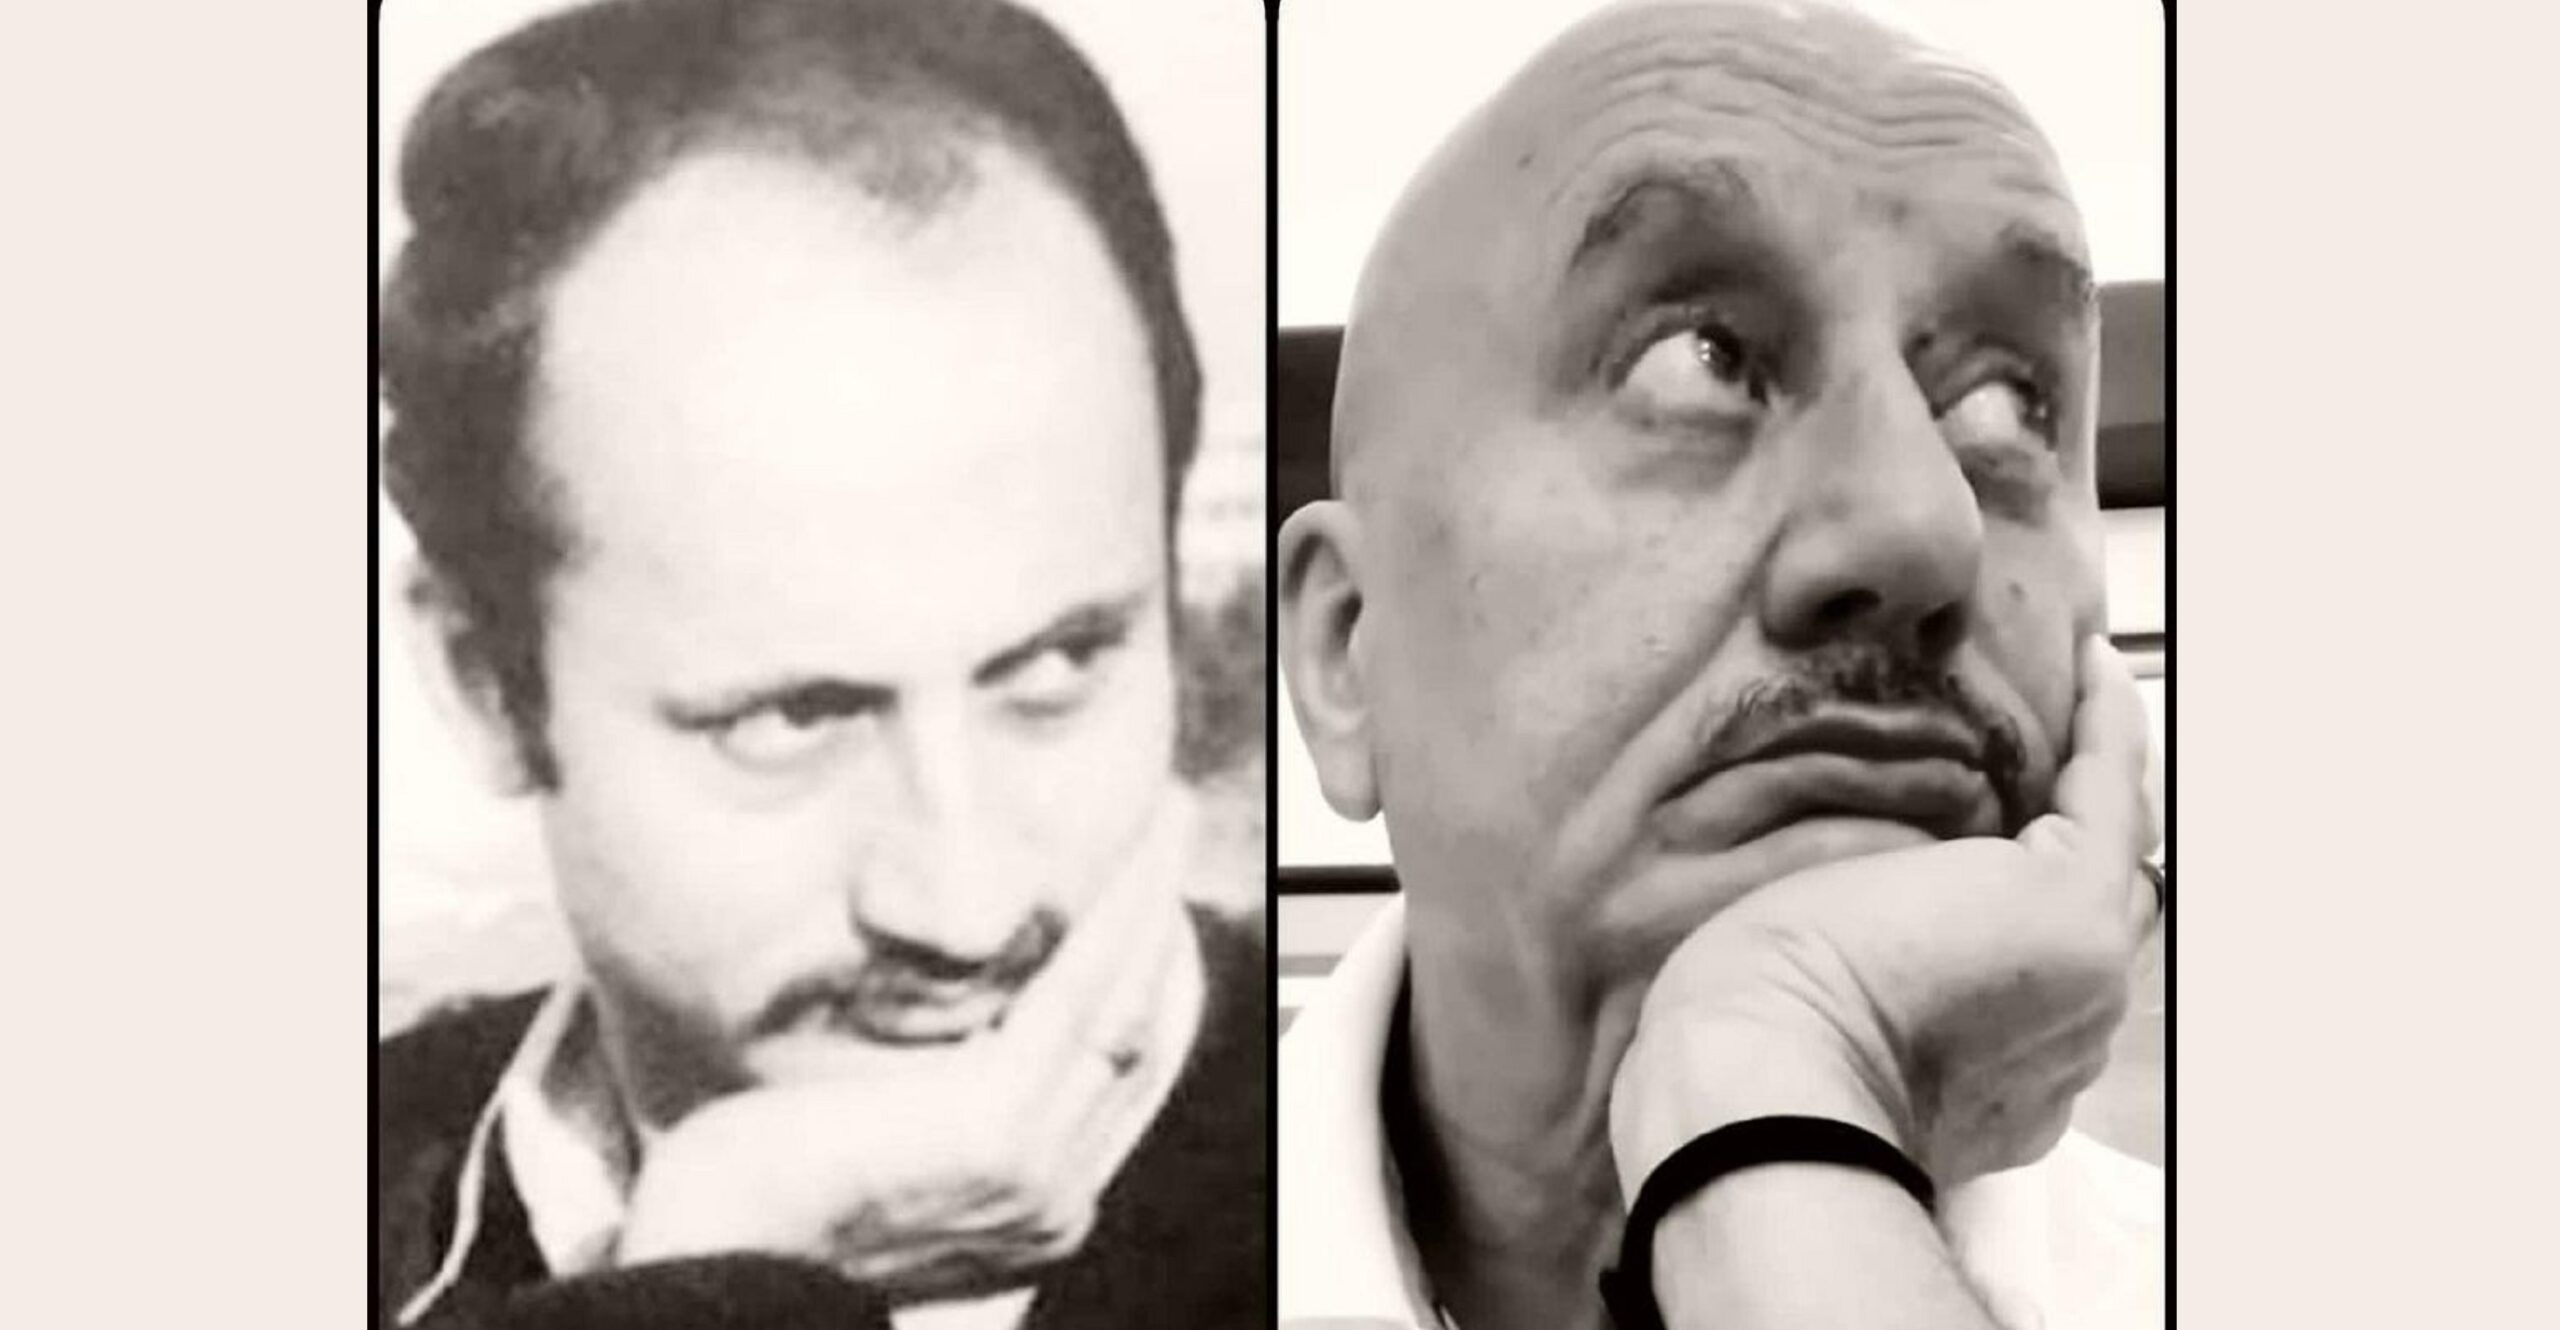 Anupam Kher Shares Picture Clicked 41 Years Ago When He Was Just Starting Out, “Face has changed but fire is the same”